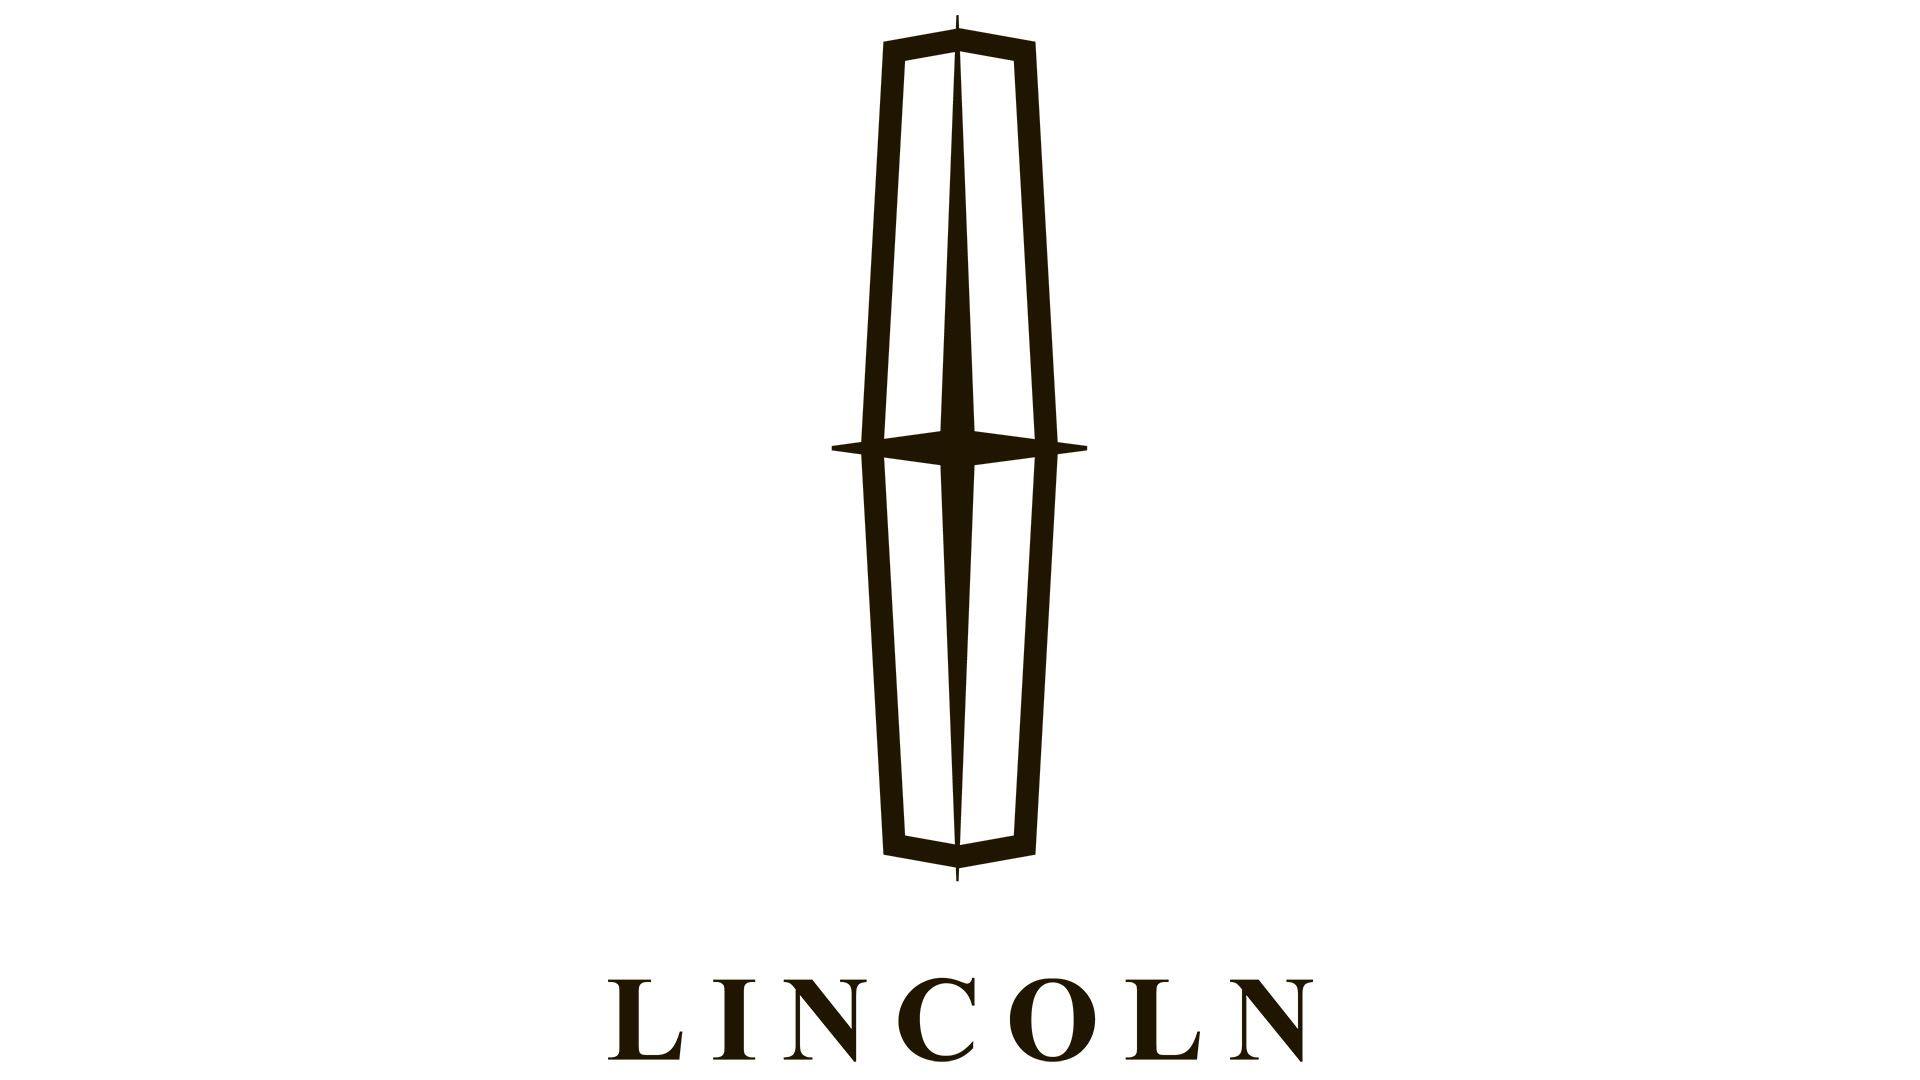 Lincolm Logo - Lincoln Logo Meaning and History [Lincoln symbol]